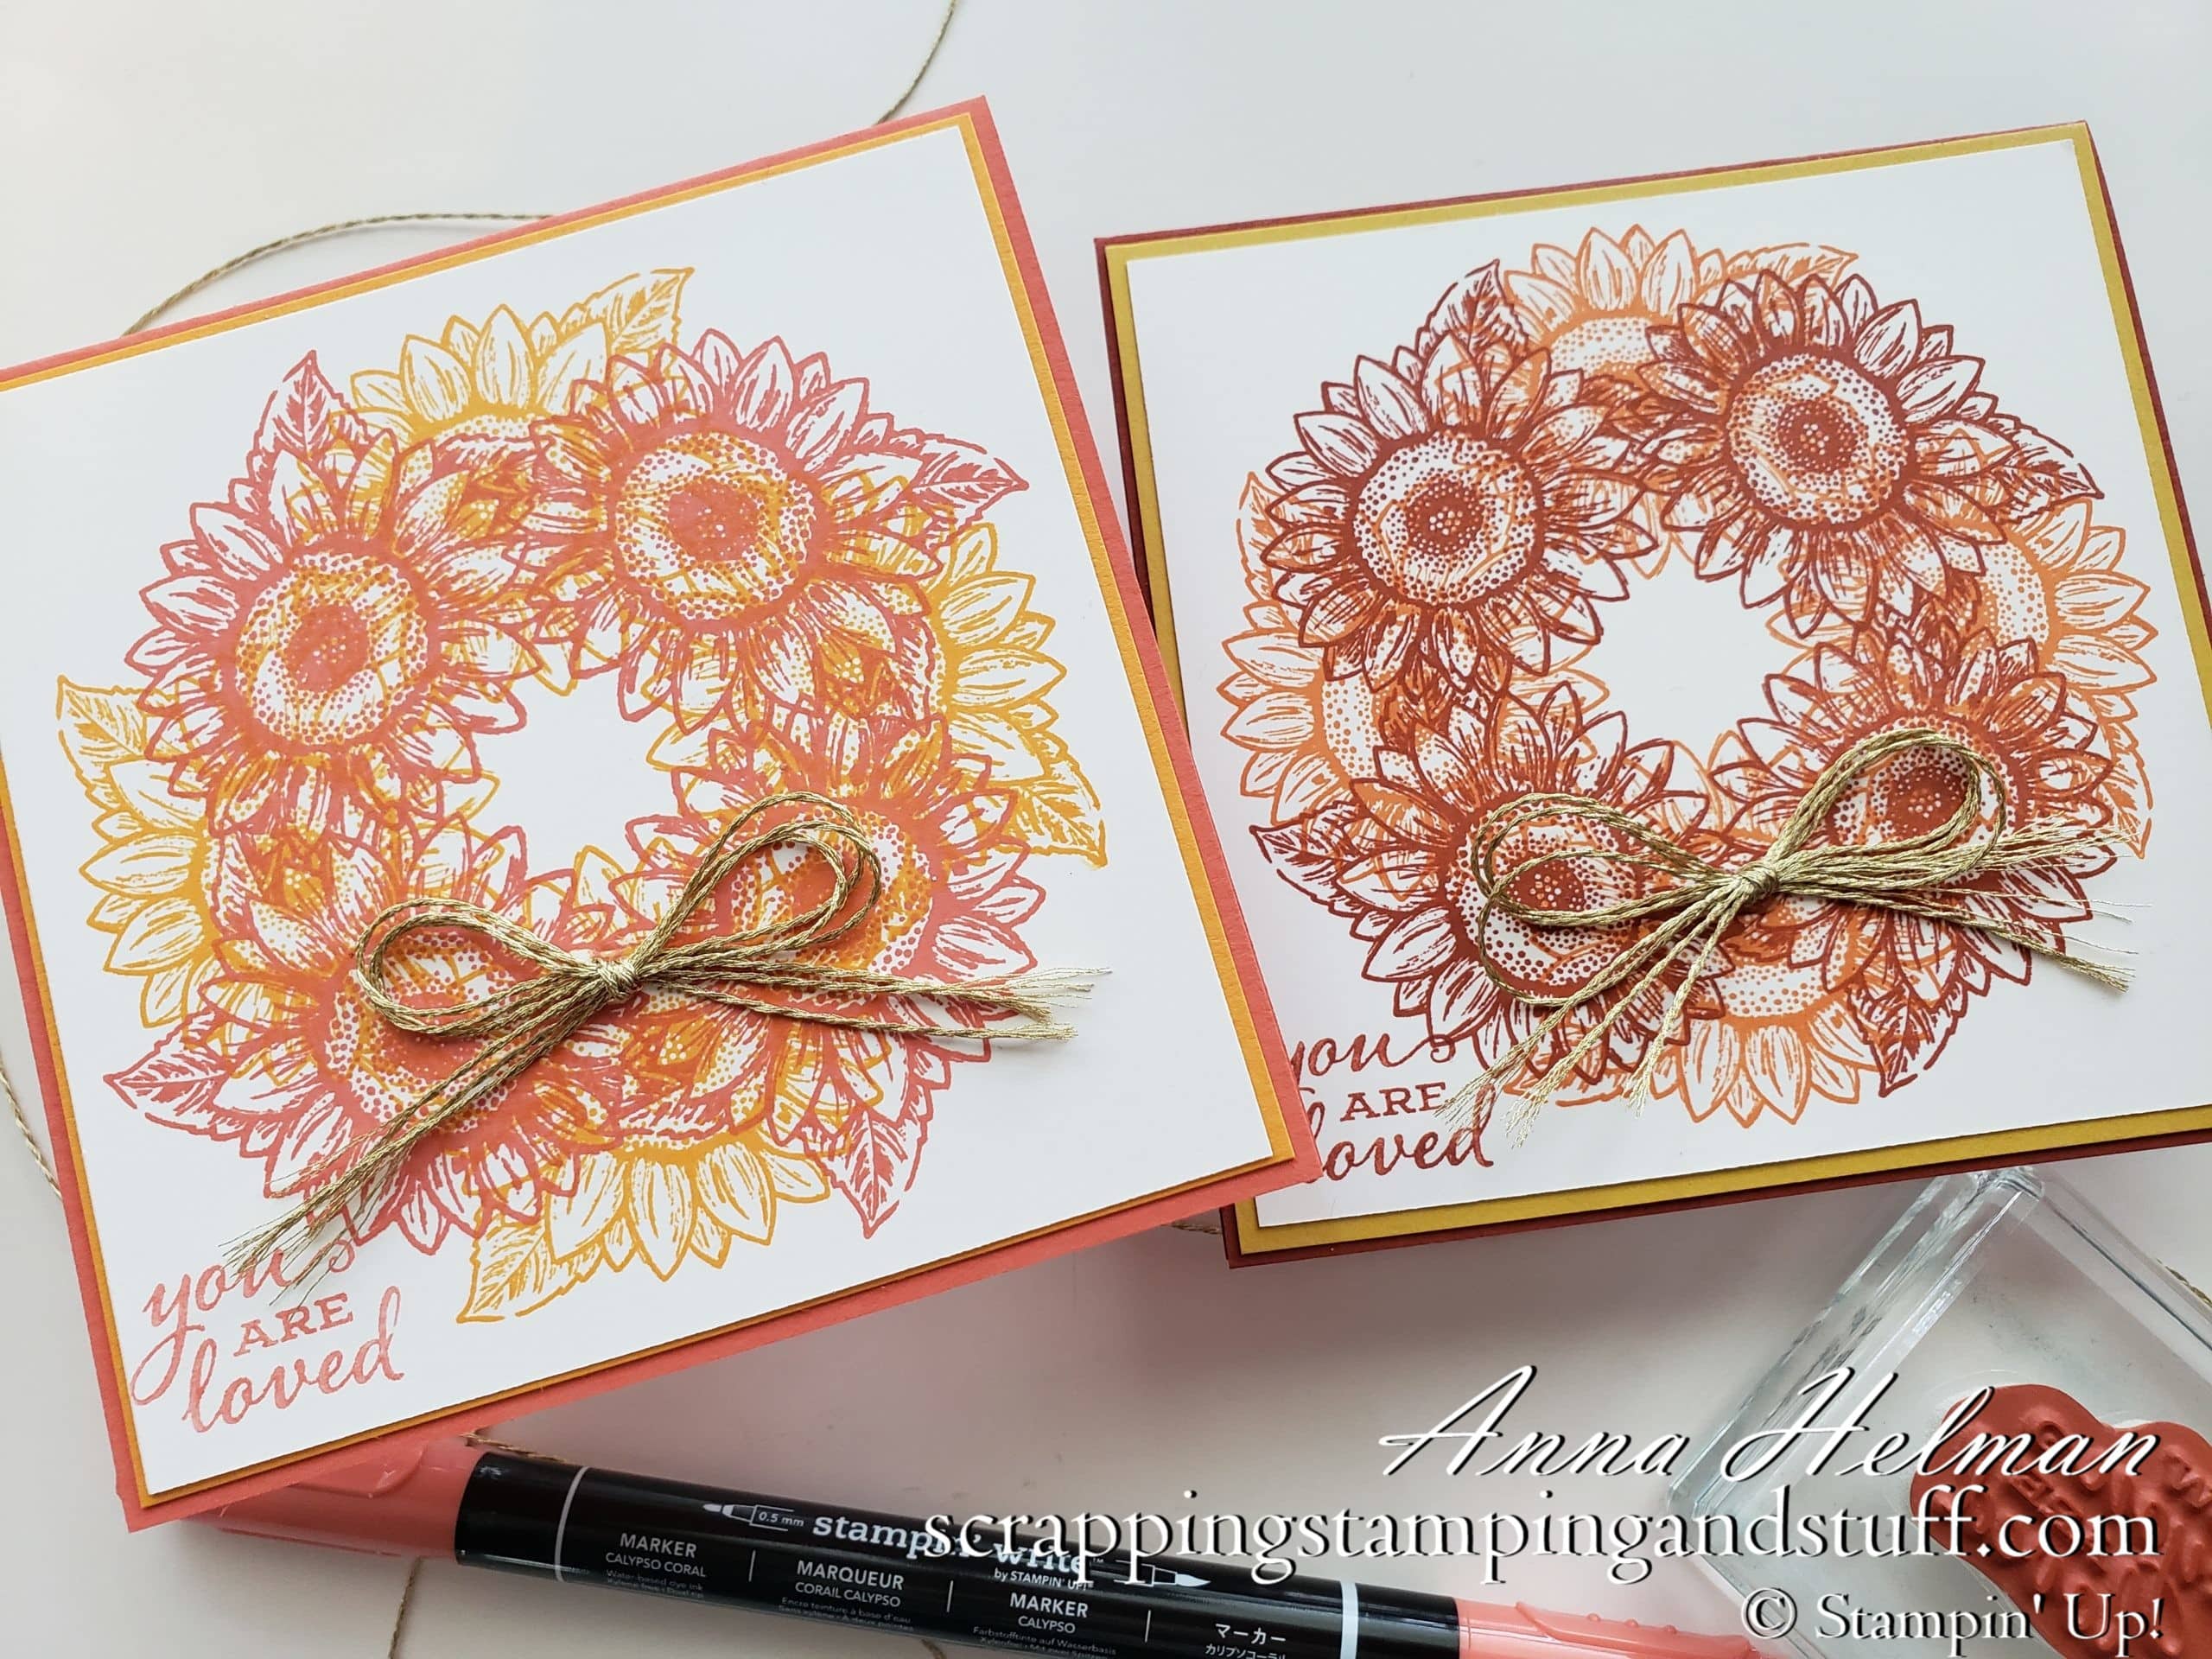 Circle Stamping Stamparatus Technique Tutorial - Create Wreaths, Circles, and More - Stampin Up Celebrate Sunflowers